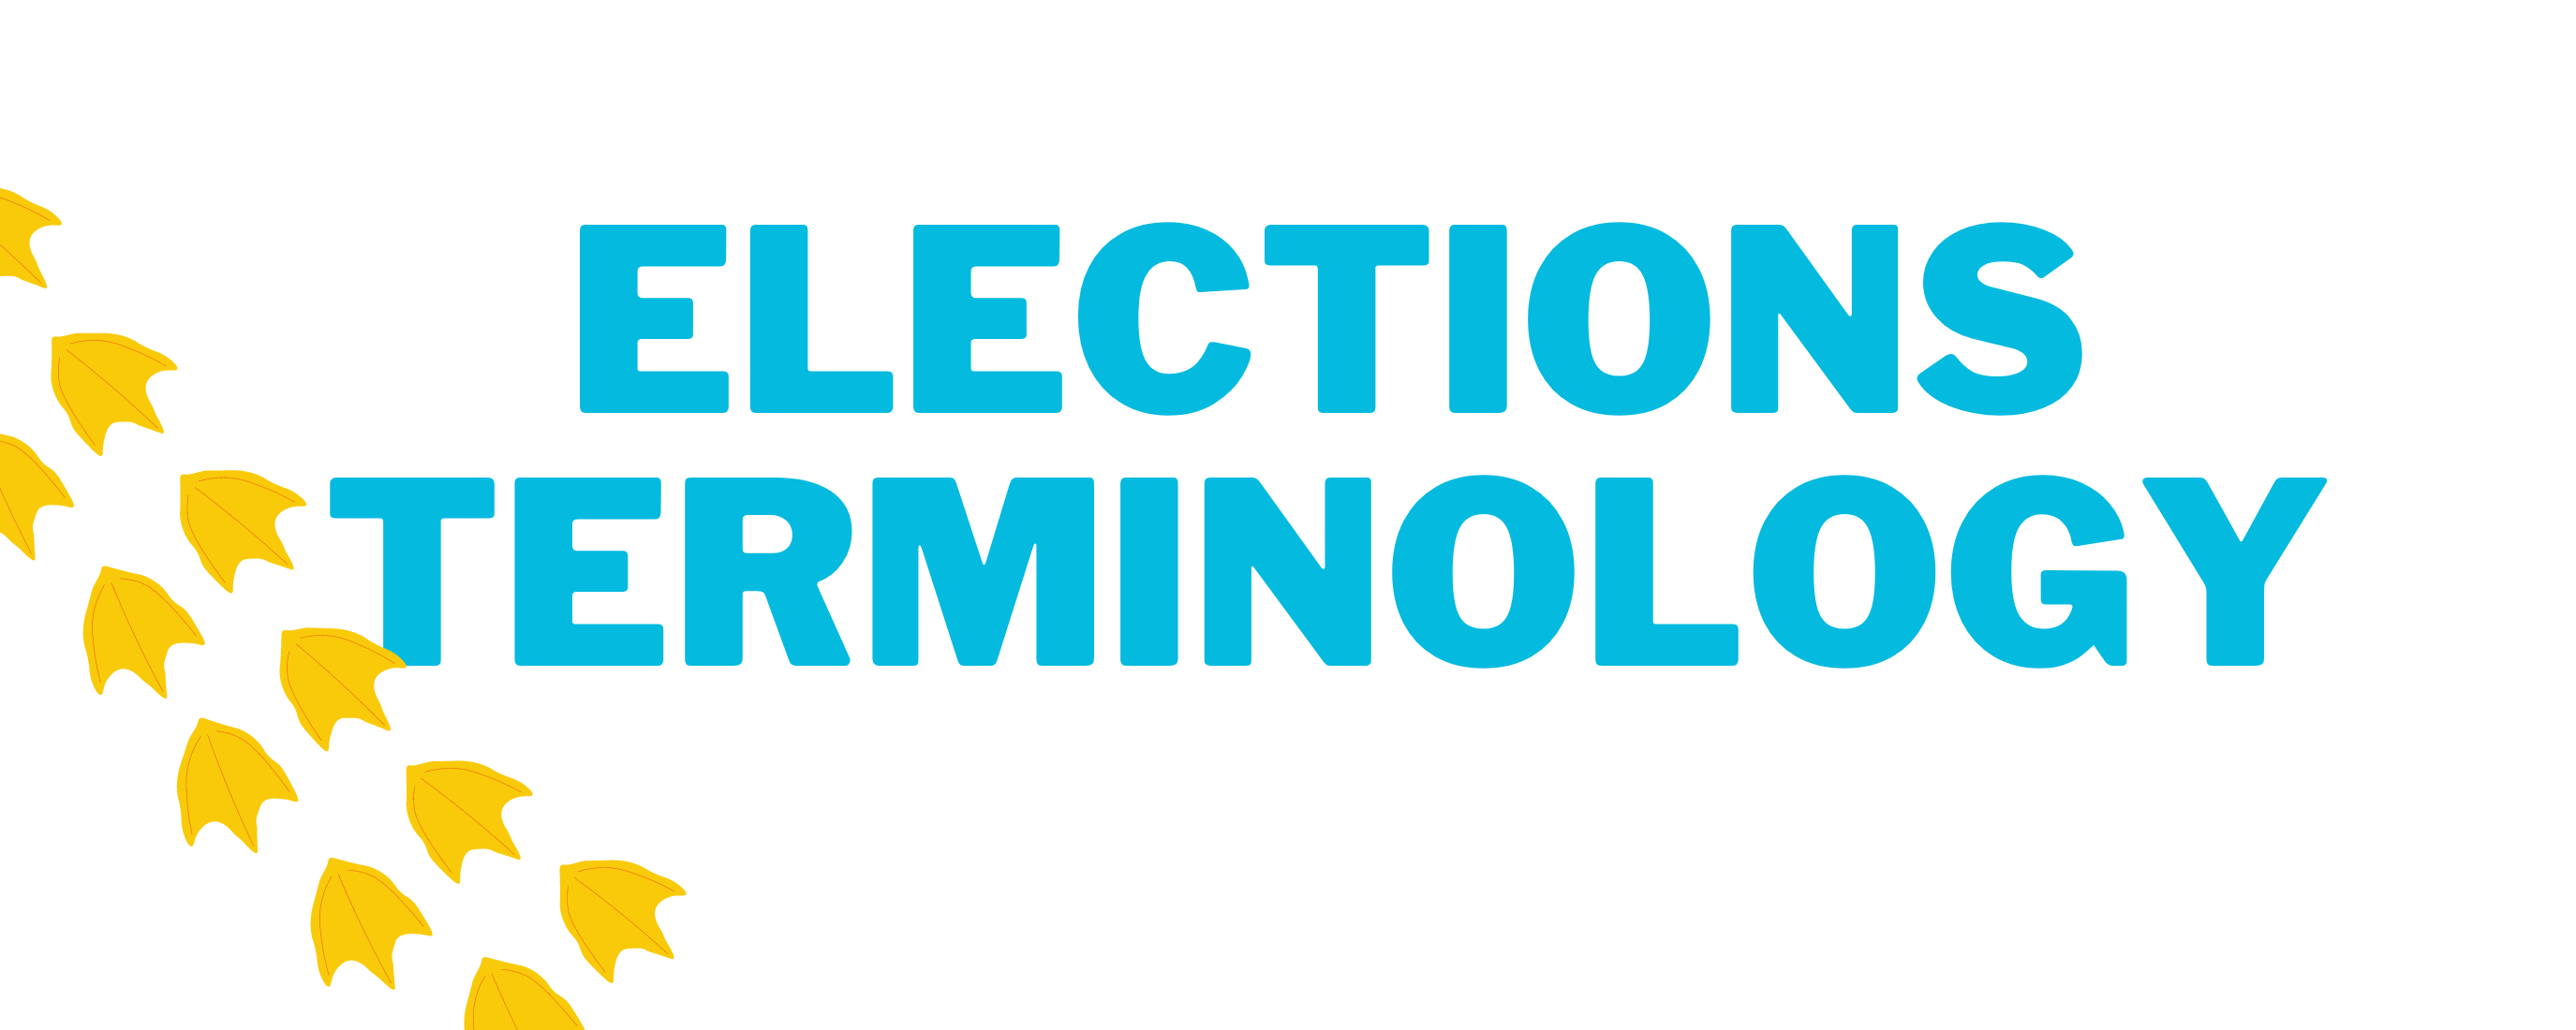 elections terminology